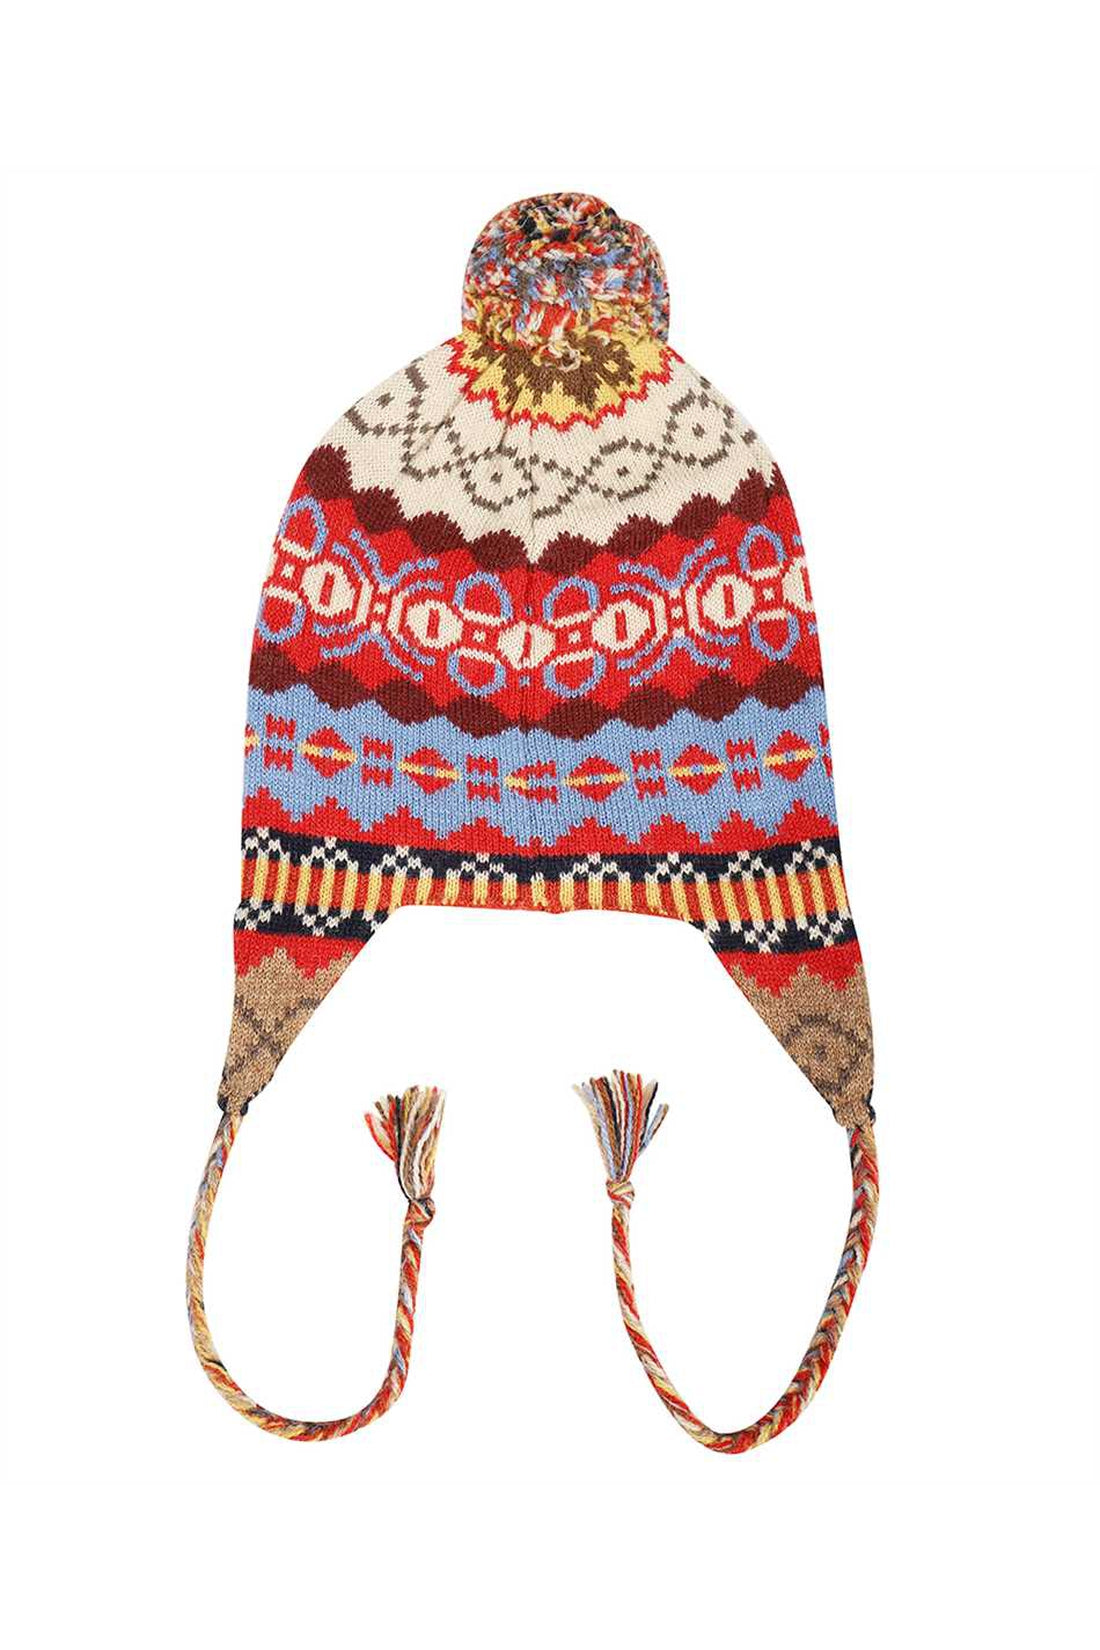 Max Mara-OUTLET-SALE-Bosso knitted hat with pom-pom-ARCHIVIST